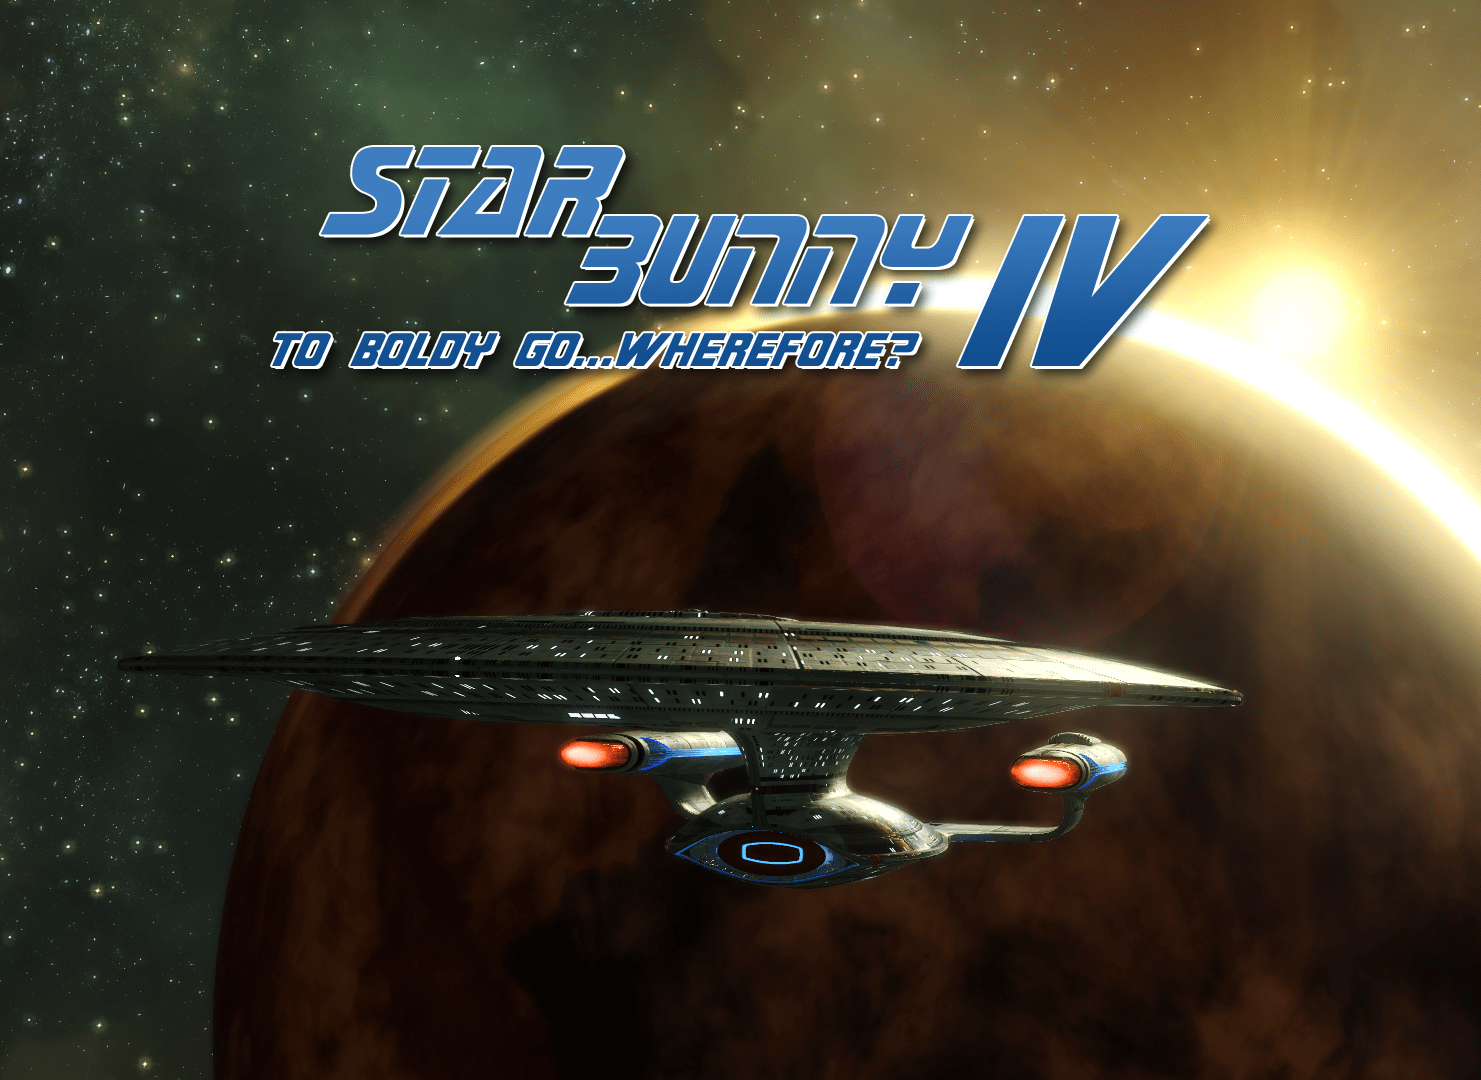 The U.S.S. Astera IV flying in front of a planet with the title 'Star Bunny IV: To Boldy Go...Wherefore?'